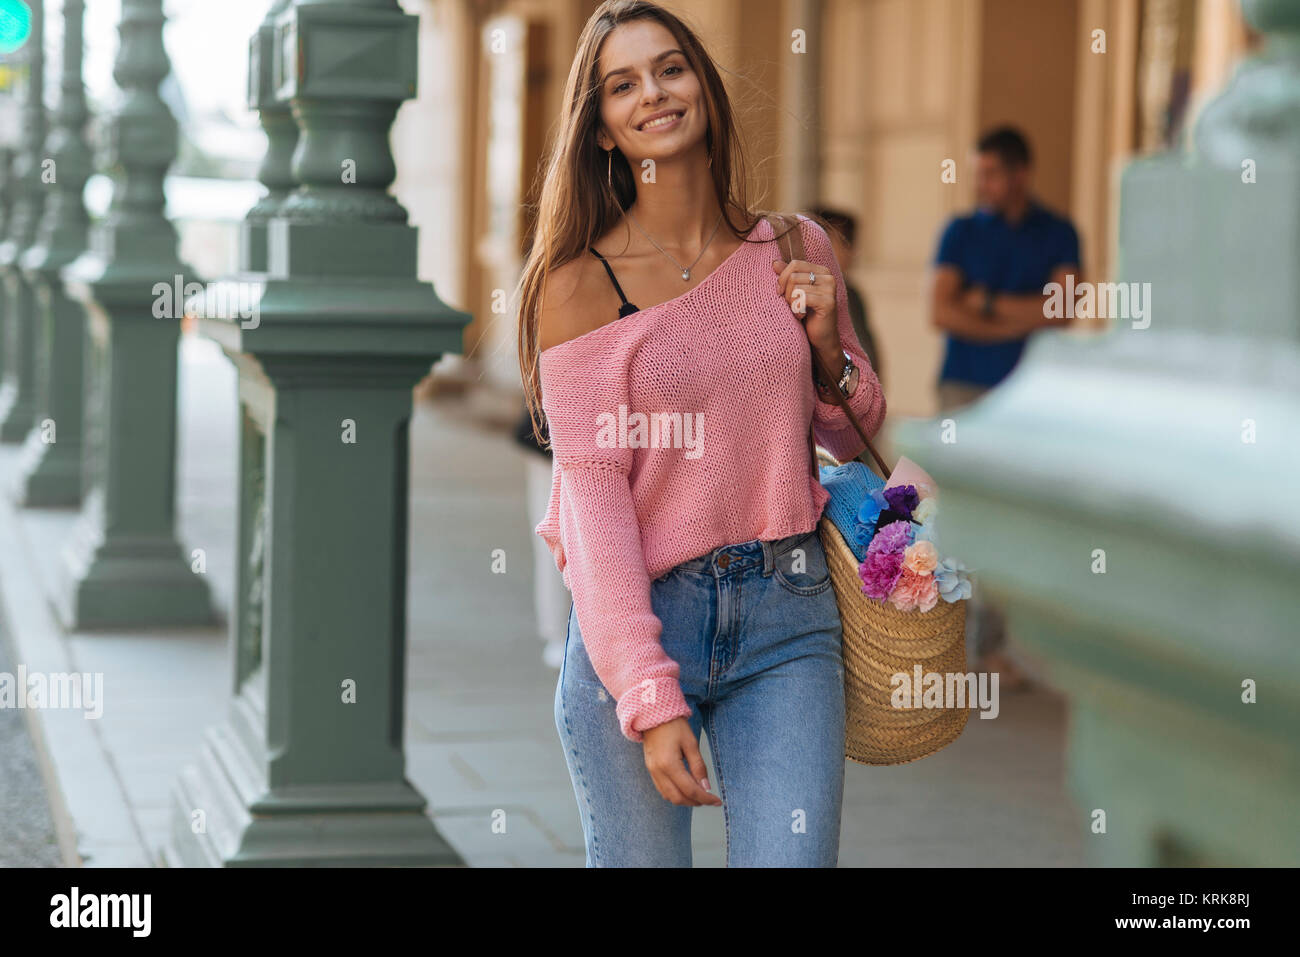 Smiling Caucasian woman holding Flowers on sidewalk Banque D'Images